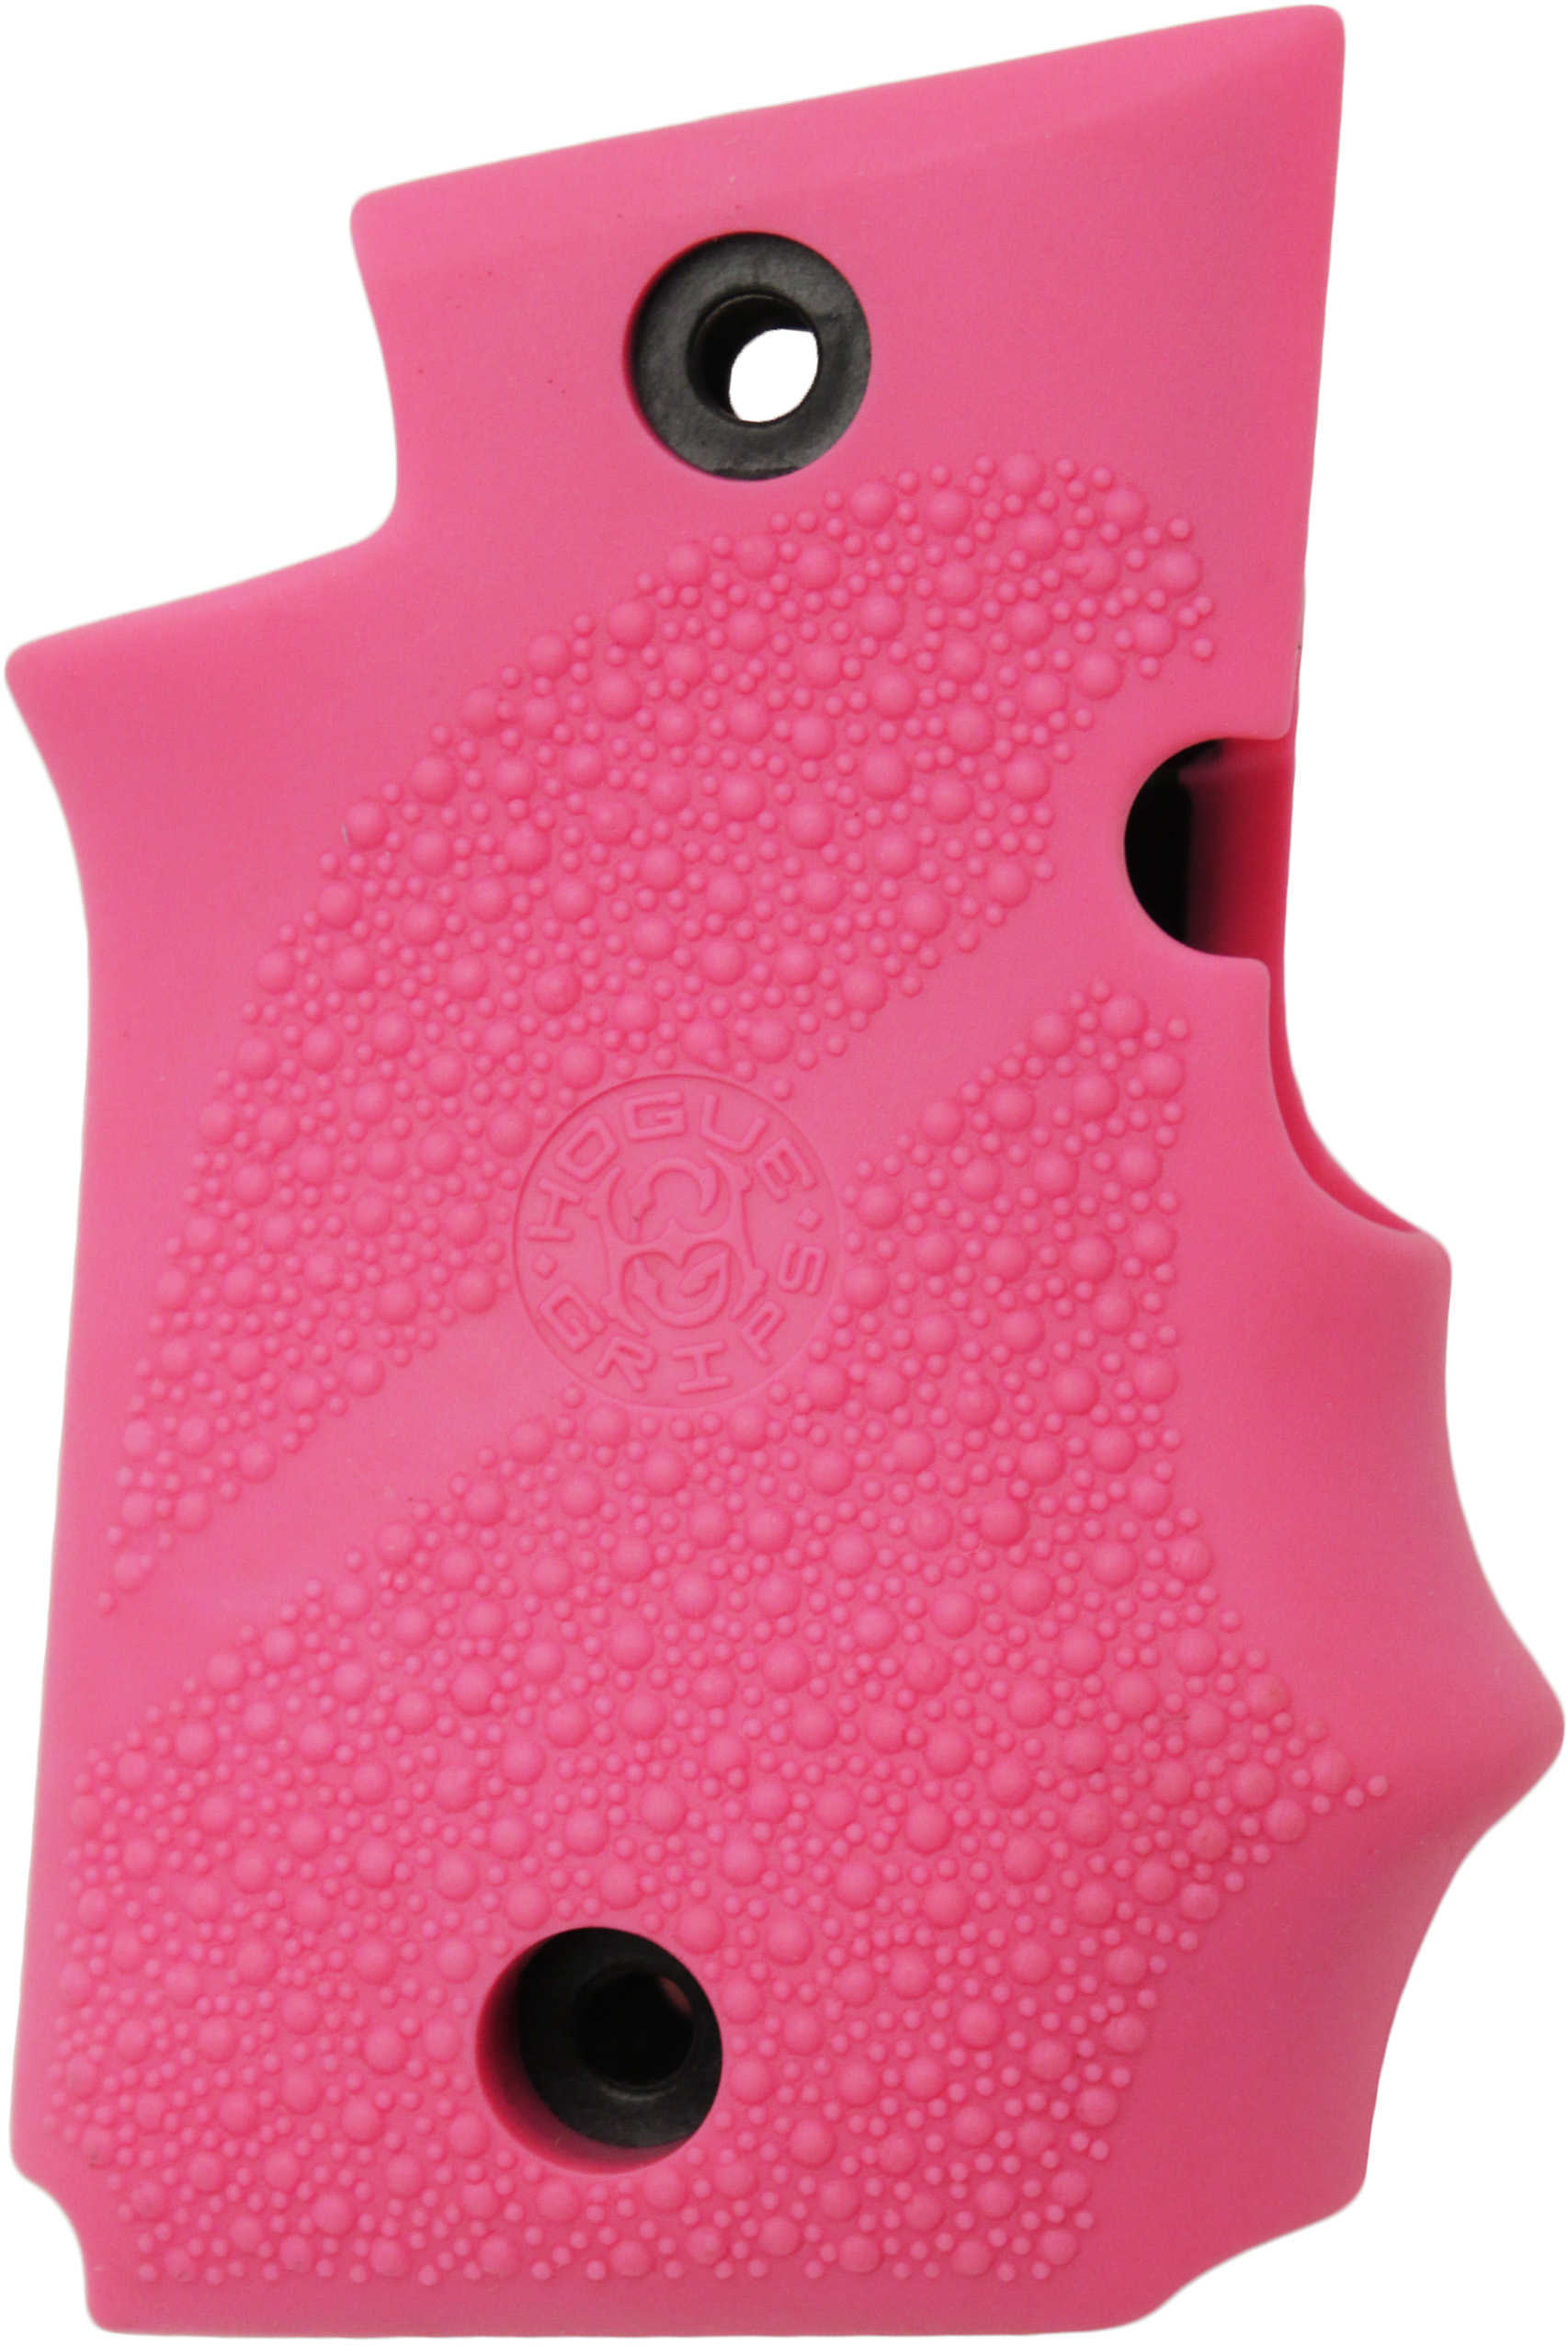 Hogue 98087 Rubber Grip with Finger Grooves Sig P938 w/Ambidextrous Safety Pink